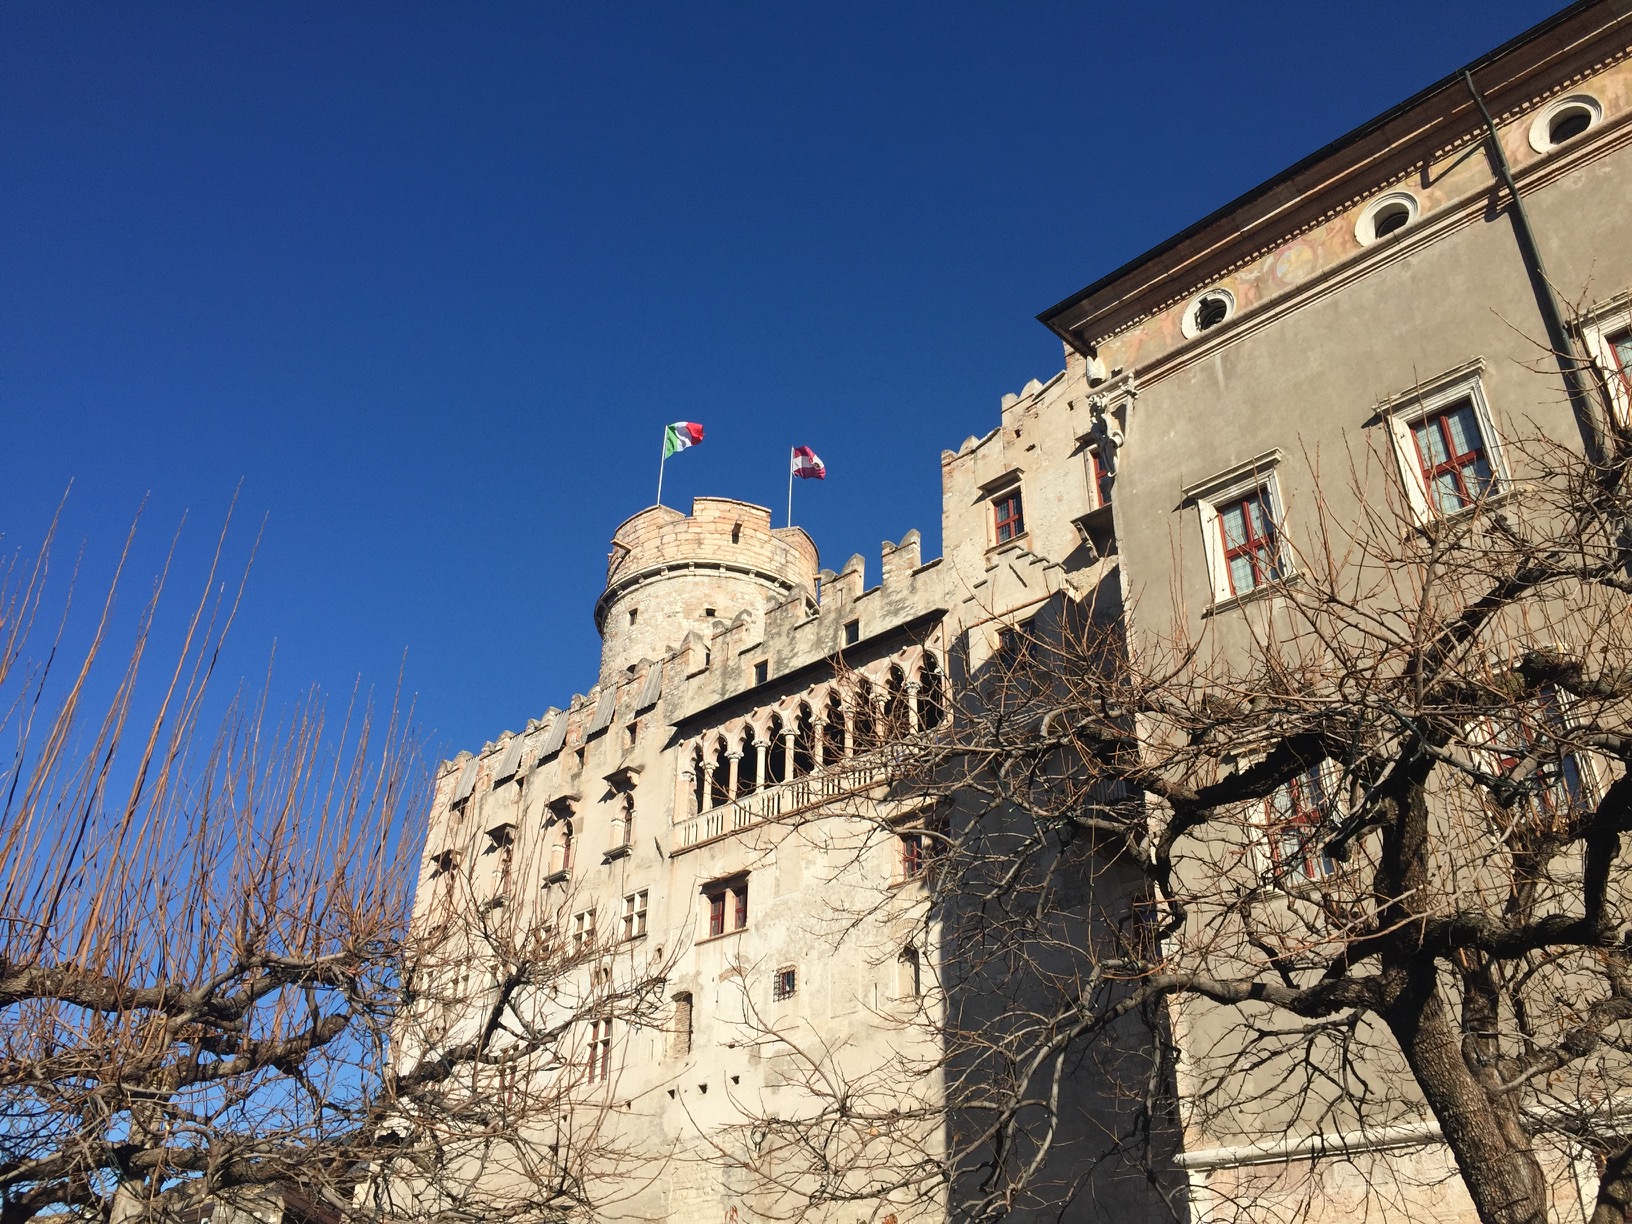 A large, rectangular building in two architectural styles, with a round tower flying the Italian tricolor and the red-and-white flag of Trento province.